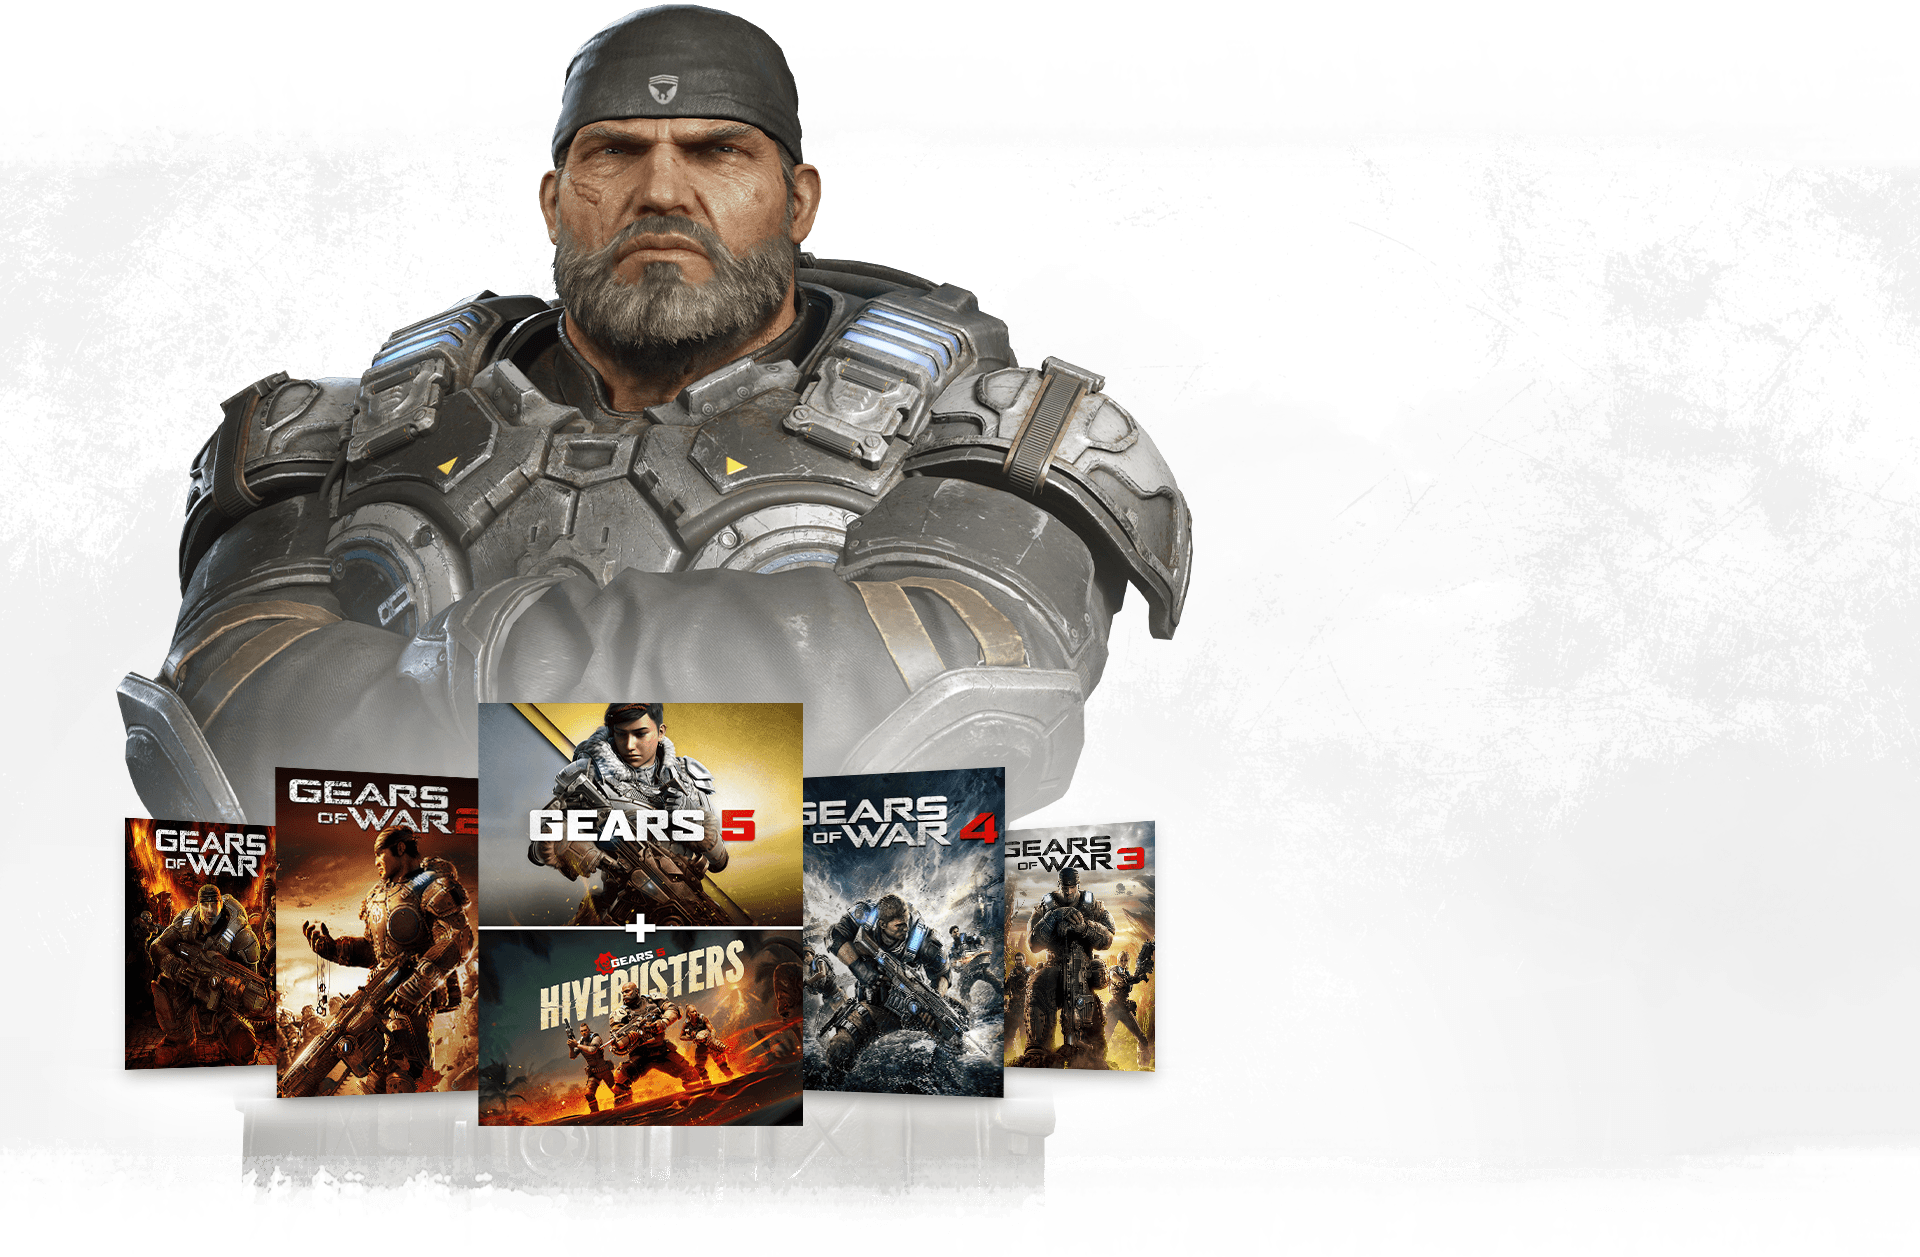 Row of gears box shots with Marcus Fenix standing behind with arms crossed